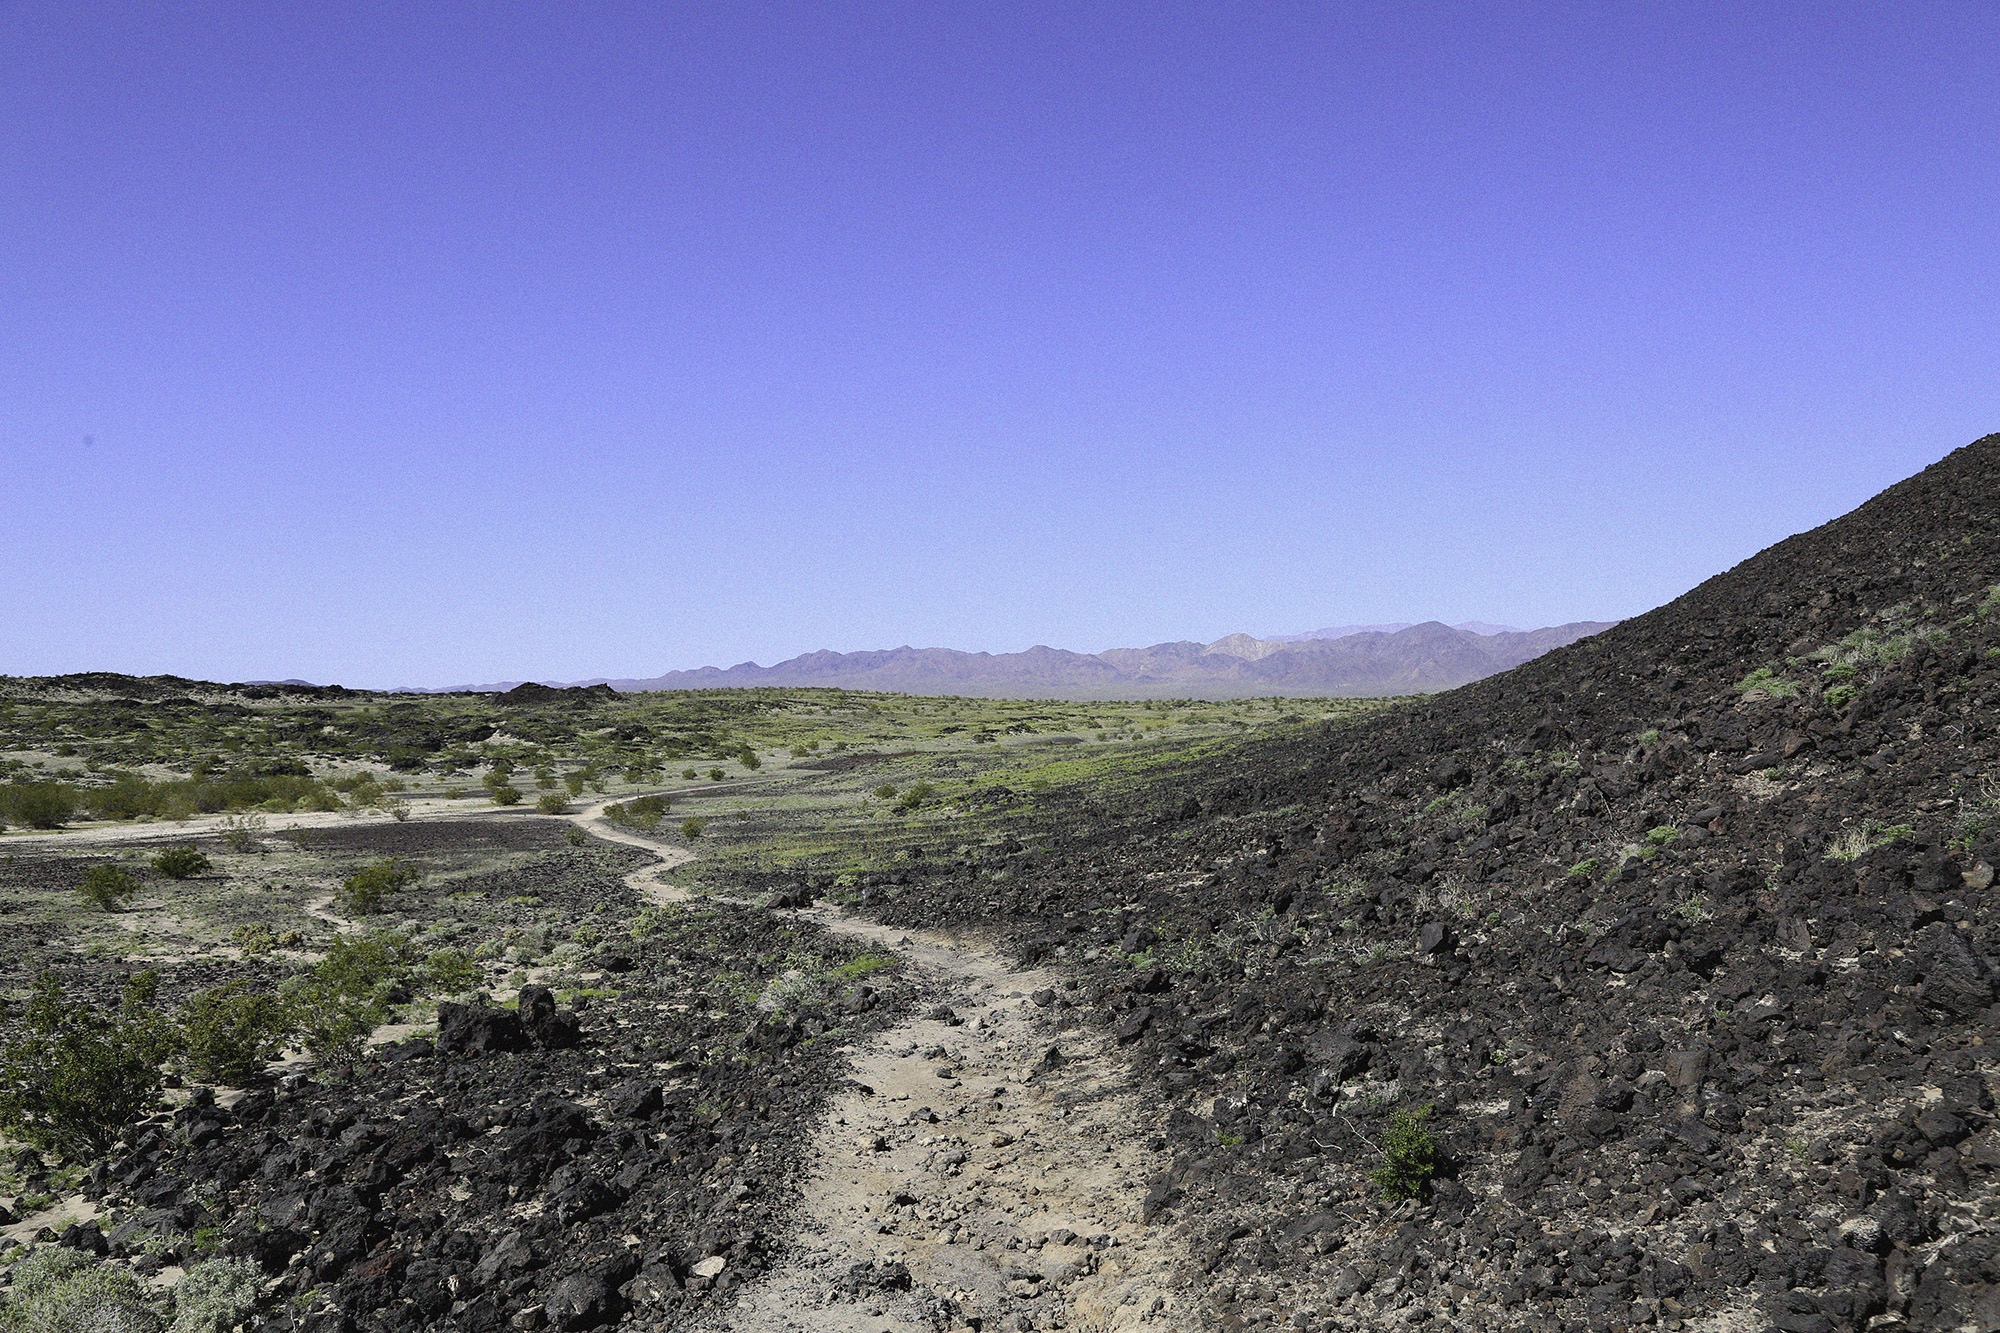 The hiking path to Amboy Crater, California.